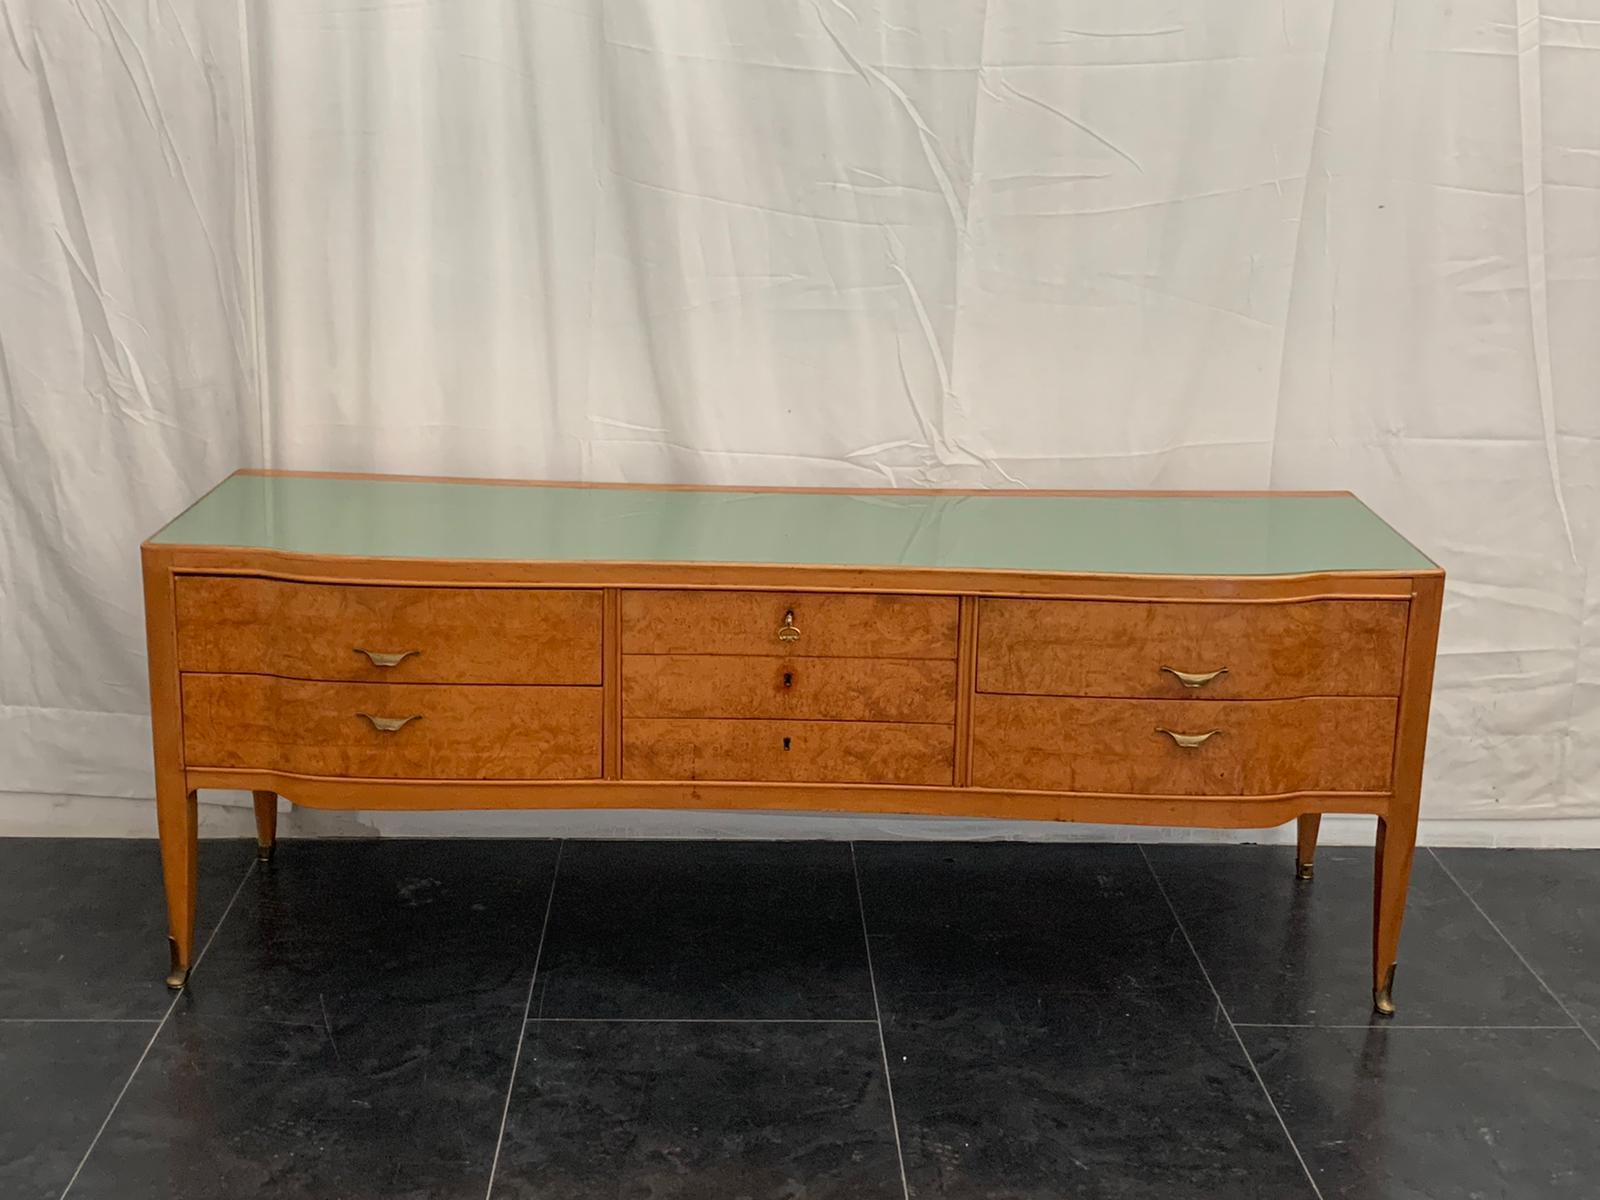 Set of maple and myrtle briar dressers and nightstands. Brass tips and handles. Retro-treated glass top from the Gris company of Varedo. Very interesting; under the top there are marks, indications, writings and initials. Dresser measures height 66x